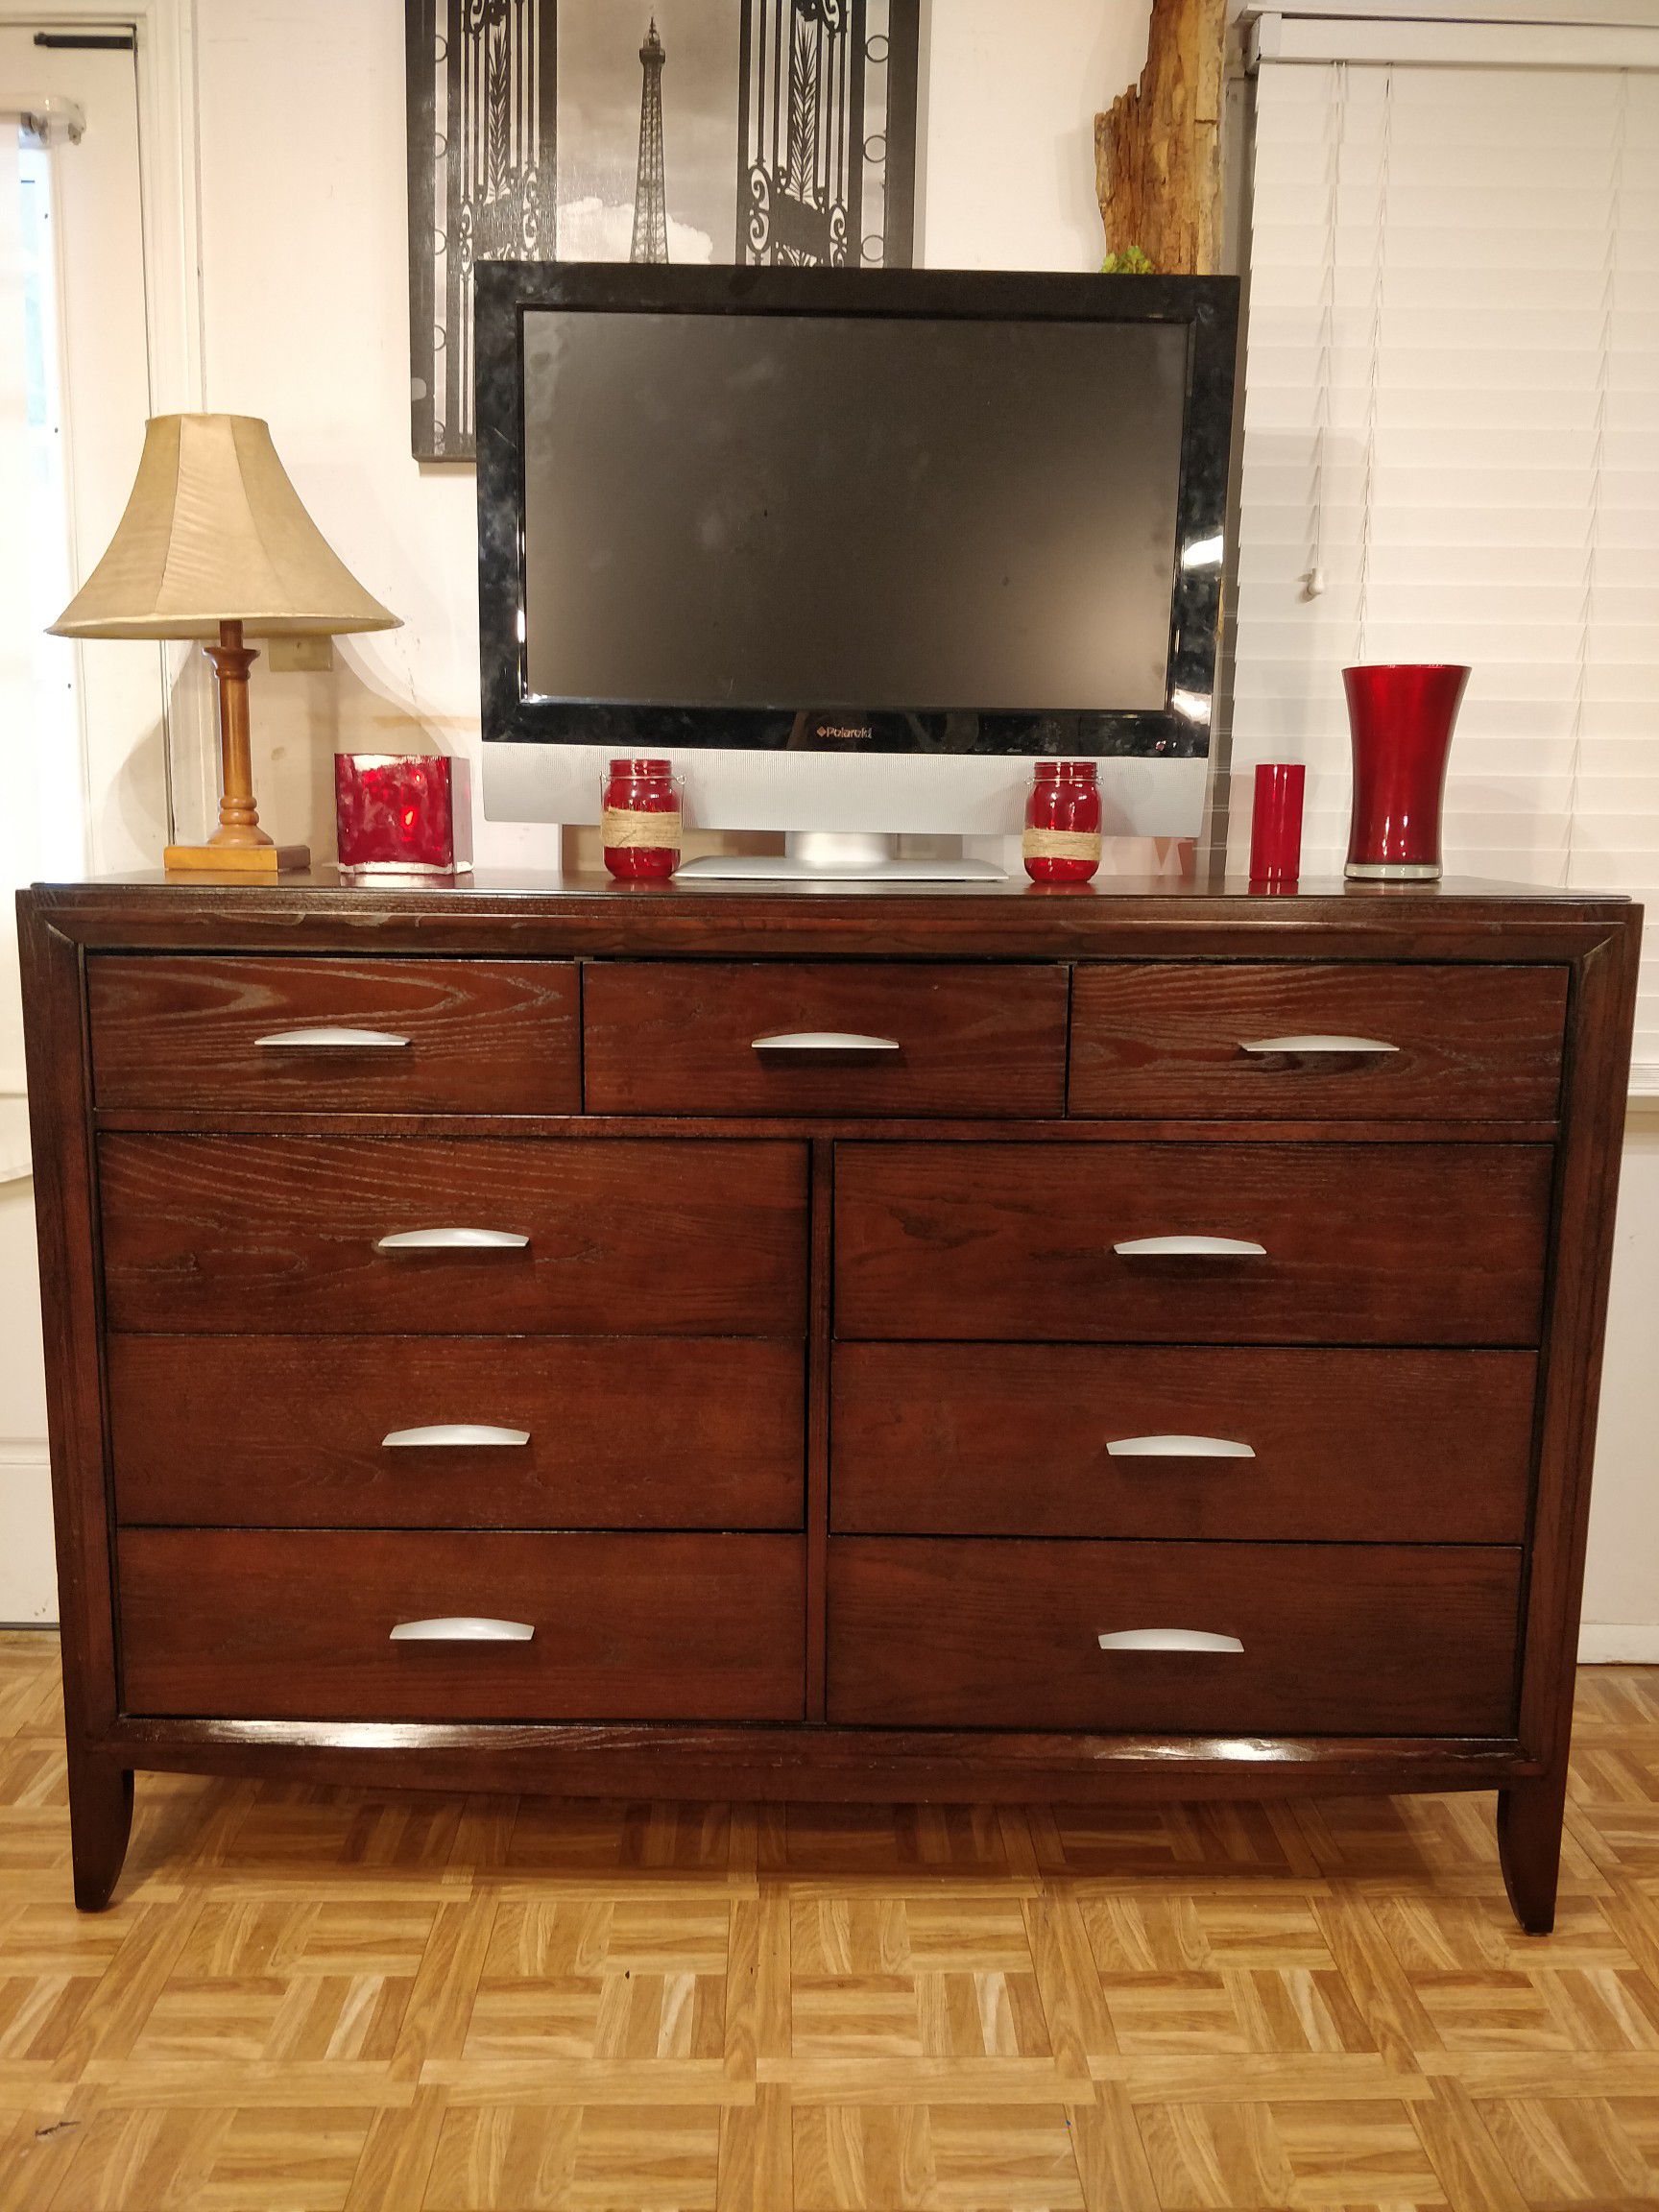 Nice solid wood modern big dresser/TV stand/ buffet with 9 drawers in very good condition, all drawers sliding smoothly. L60"*W18.4"*H42"